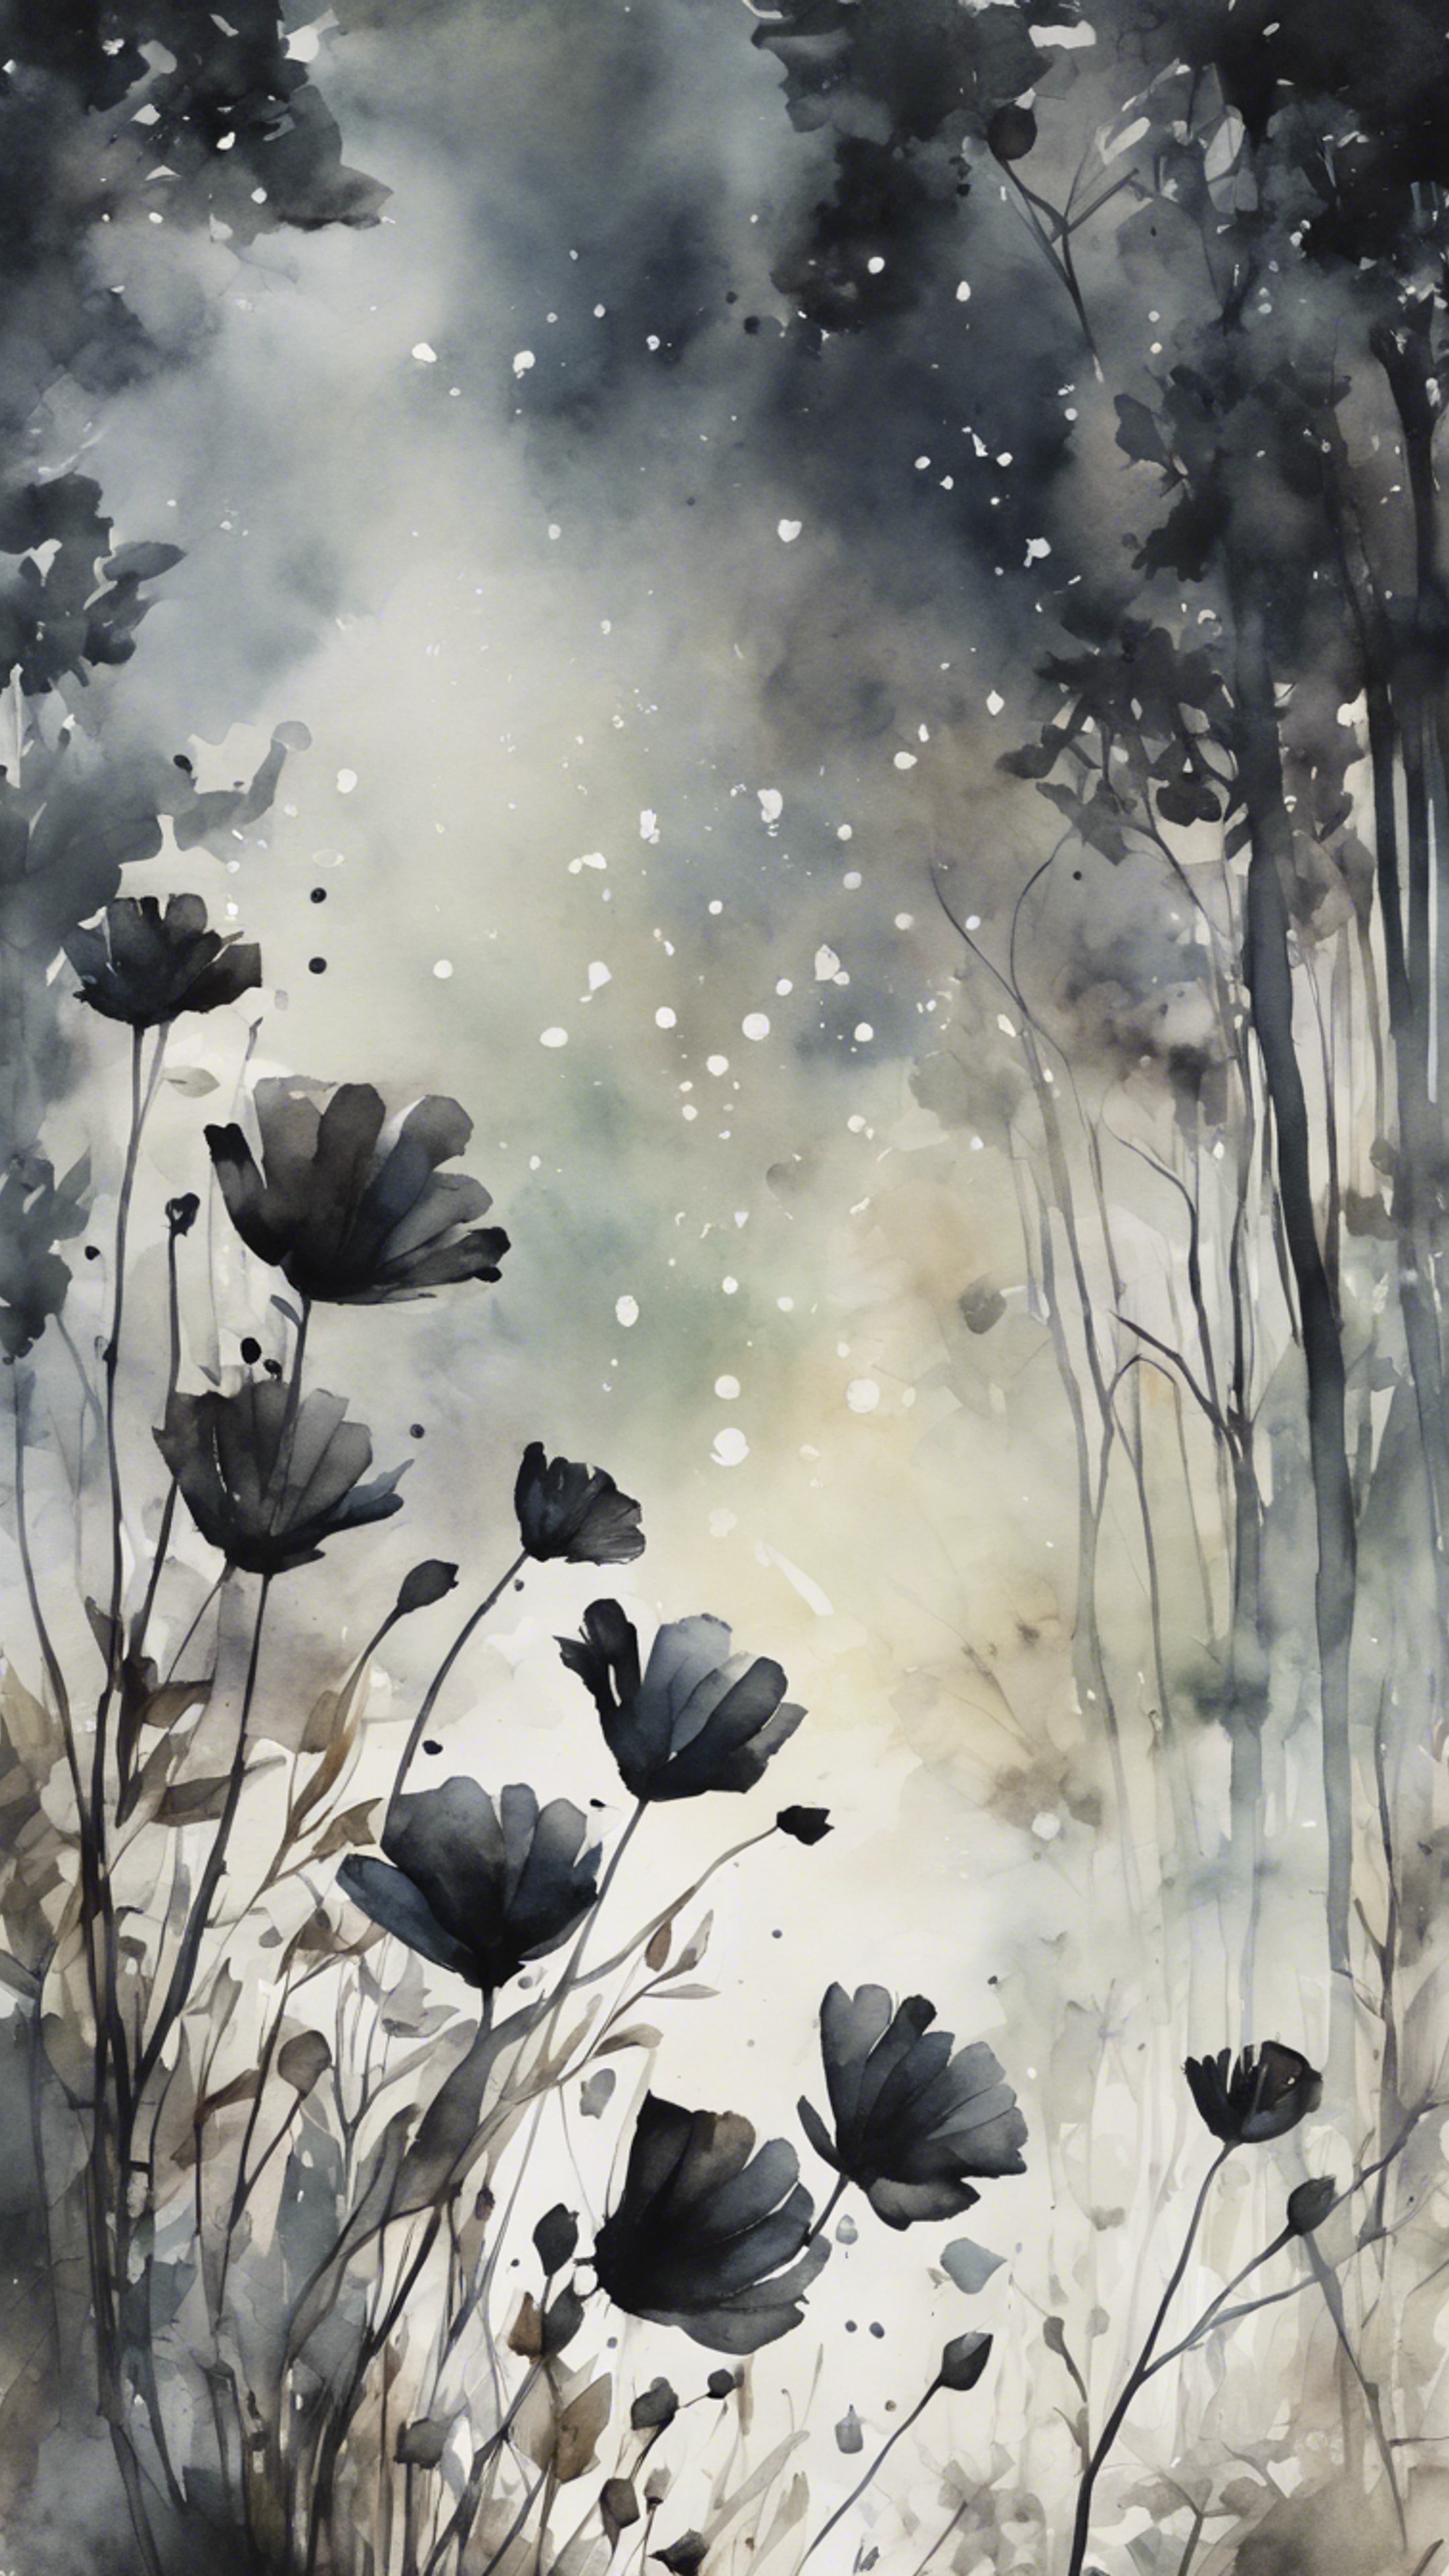 A dreamy watercolor painting depicting black flowers blooming in the heart of a dense forest.壁紙[006f57e6dd8144ebb2db]